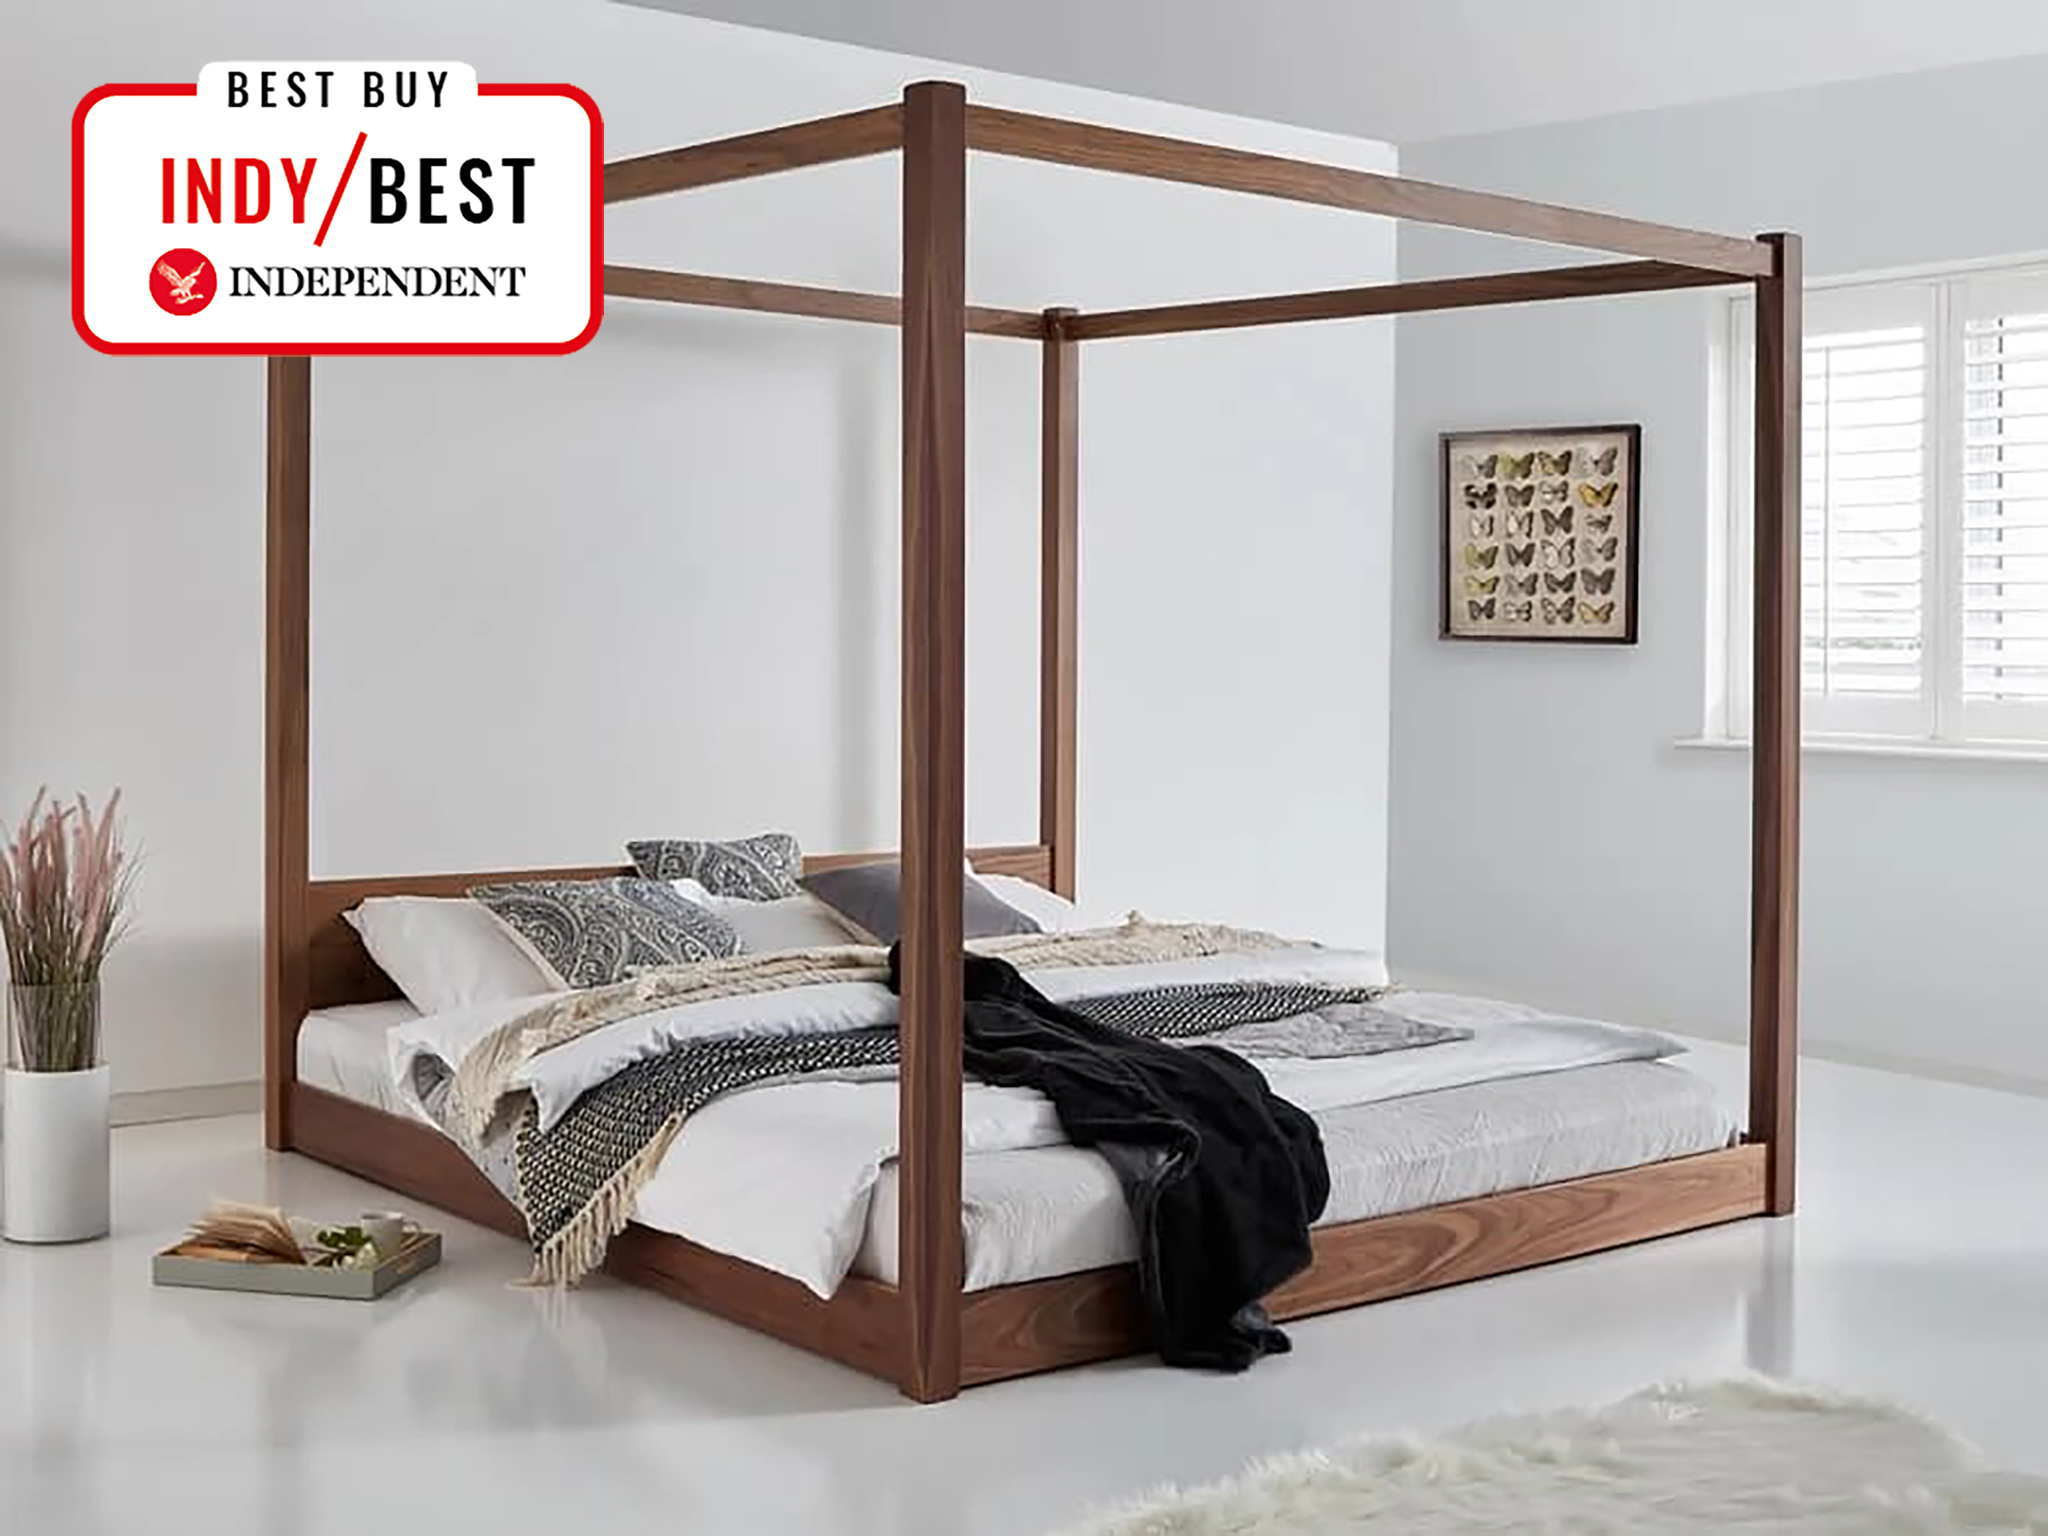 Get laid beds low four-poster wooden bed frame